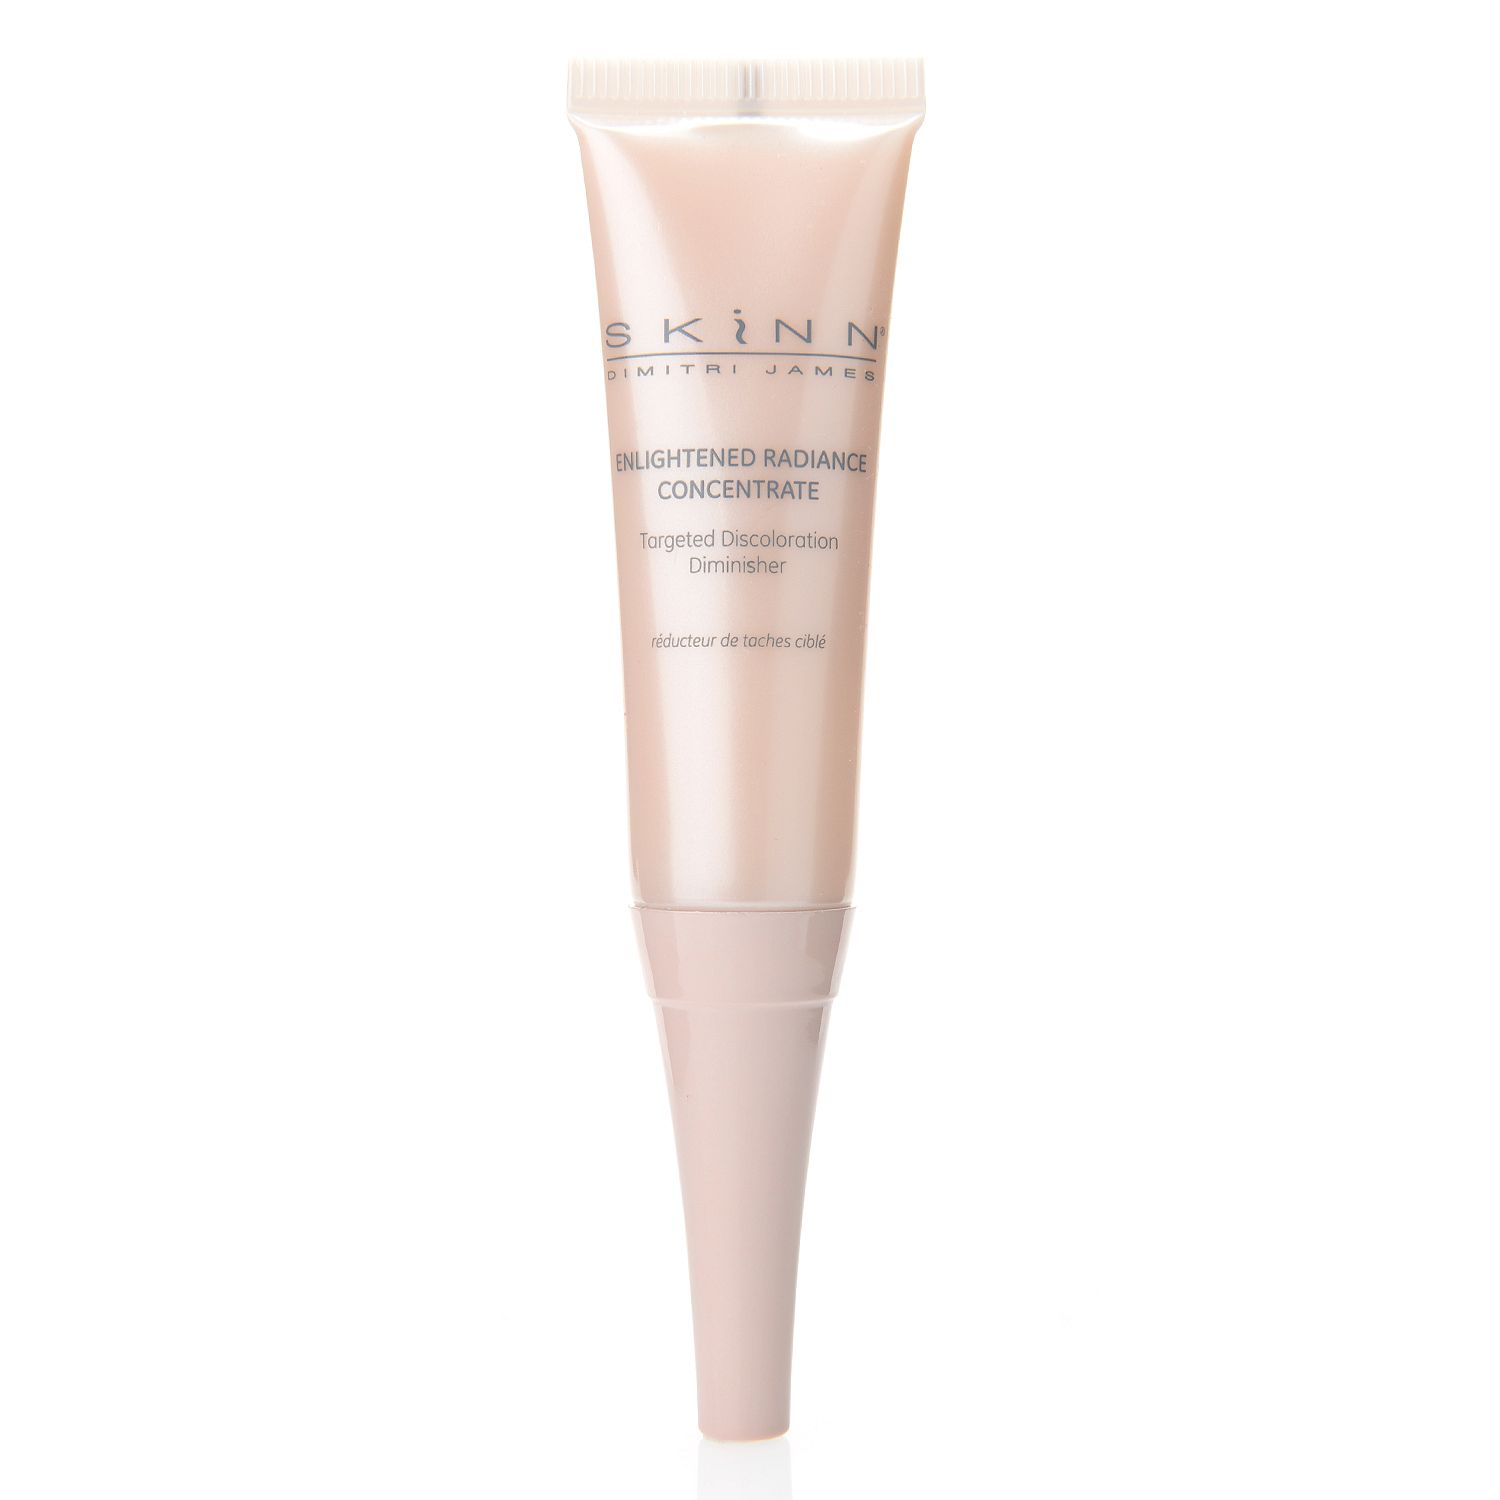 311-761- Skinn Cosmetics Enlightened Radiance Concentrate 0.34 oz